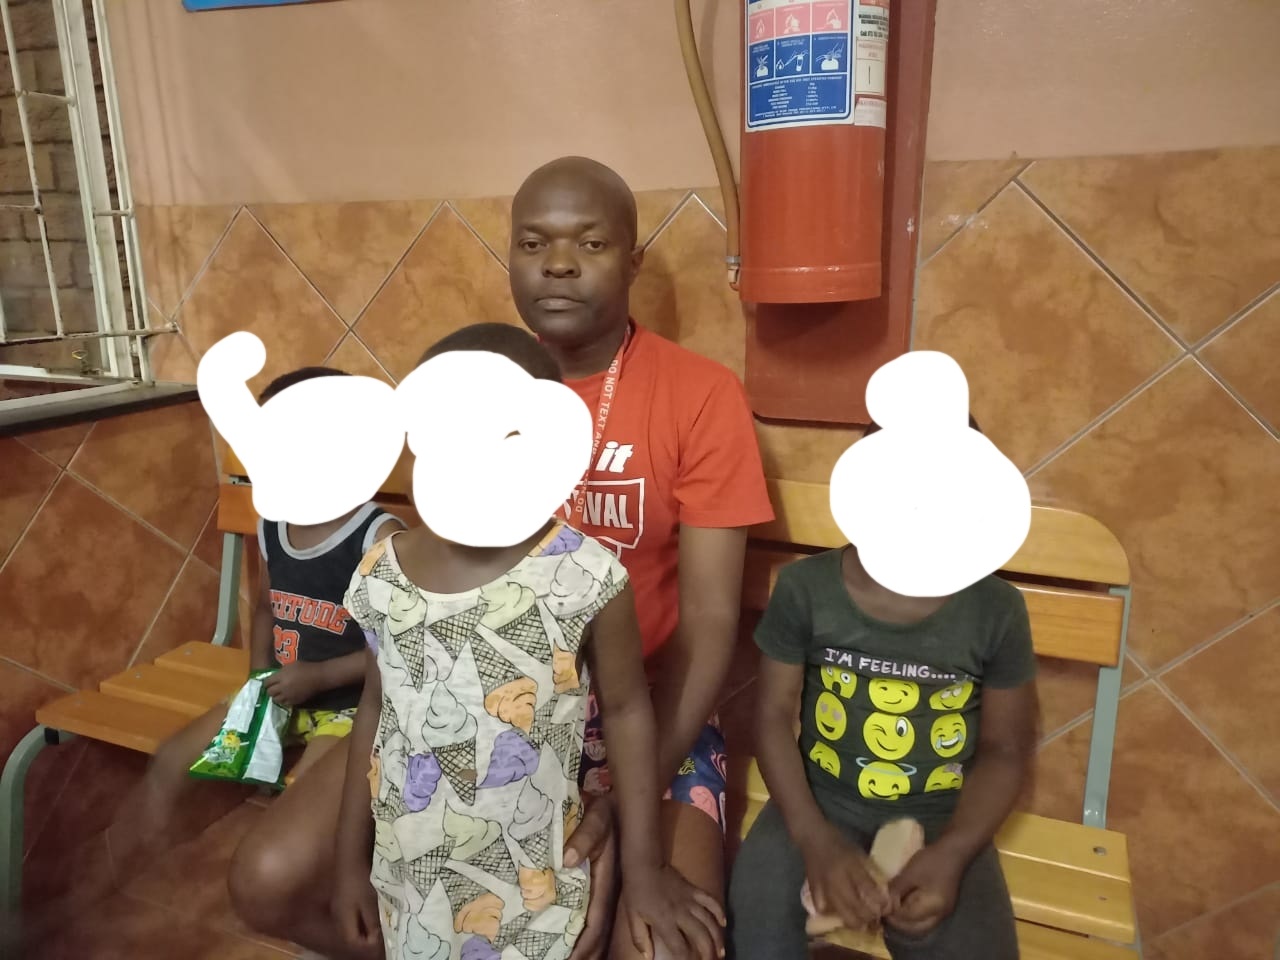 Limpopo Provincial Commissioner applauds off duty police officer for speedy recovery of three missing children and warns parents against child neglect